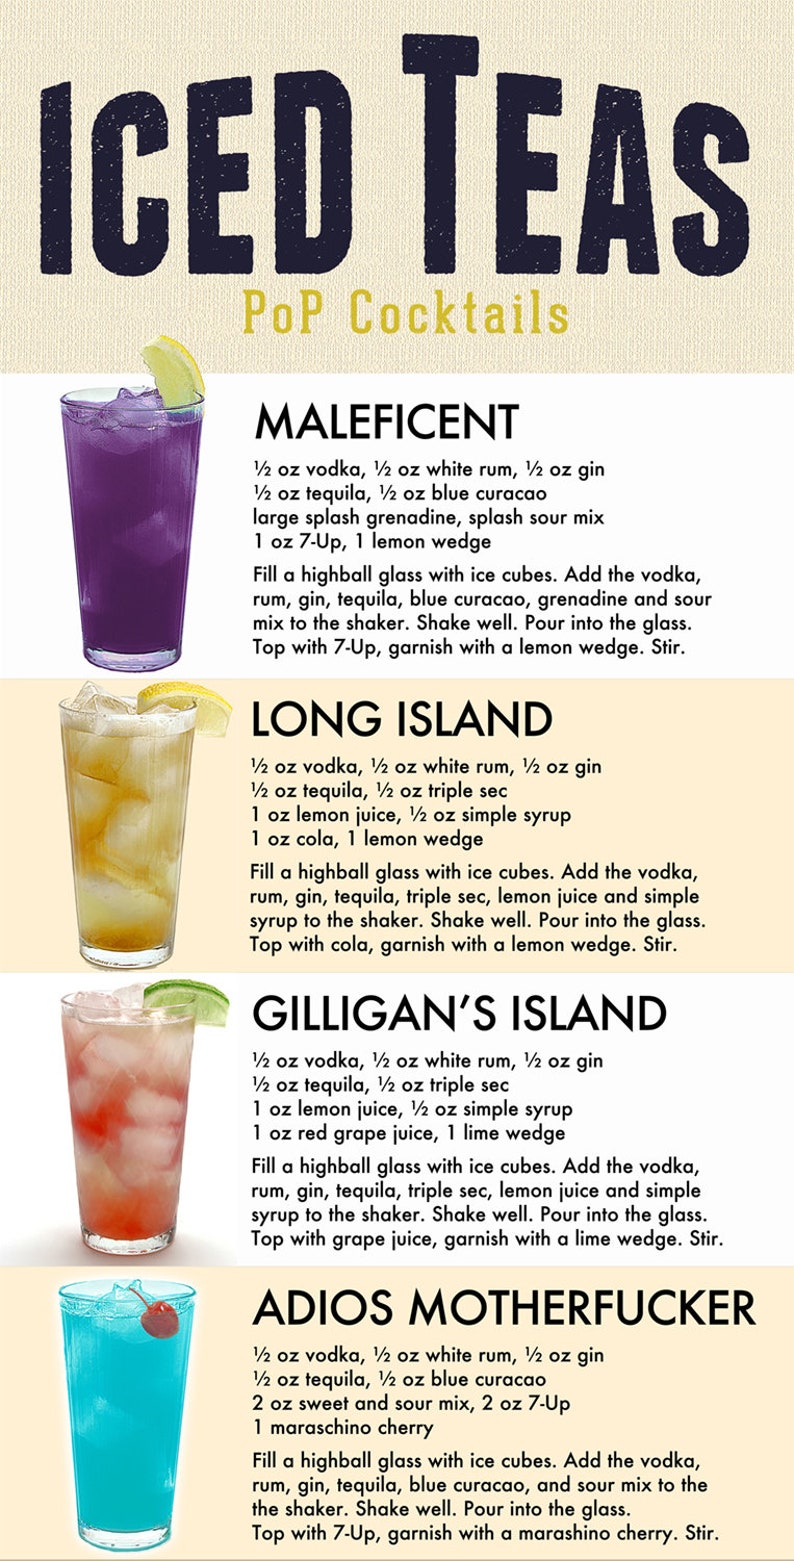 Pop Cocktails Drink PosterBoard 24 x 36 Glorious Cocktail Poster image 2